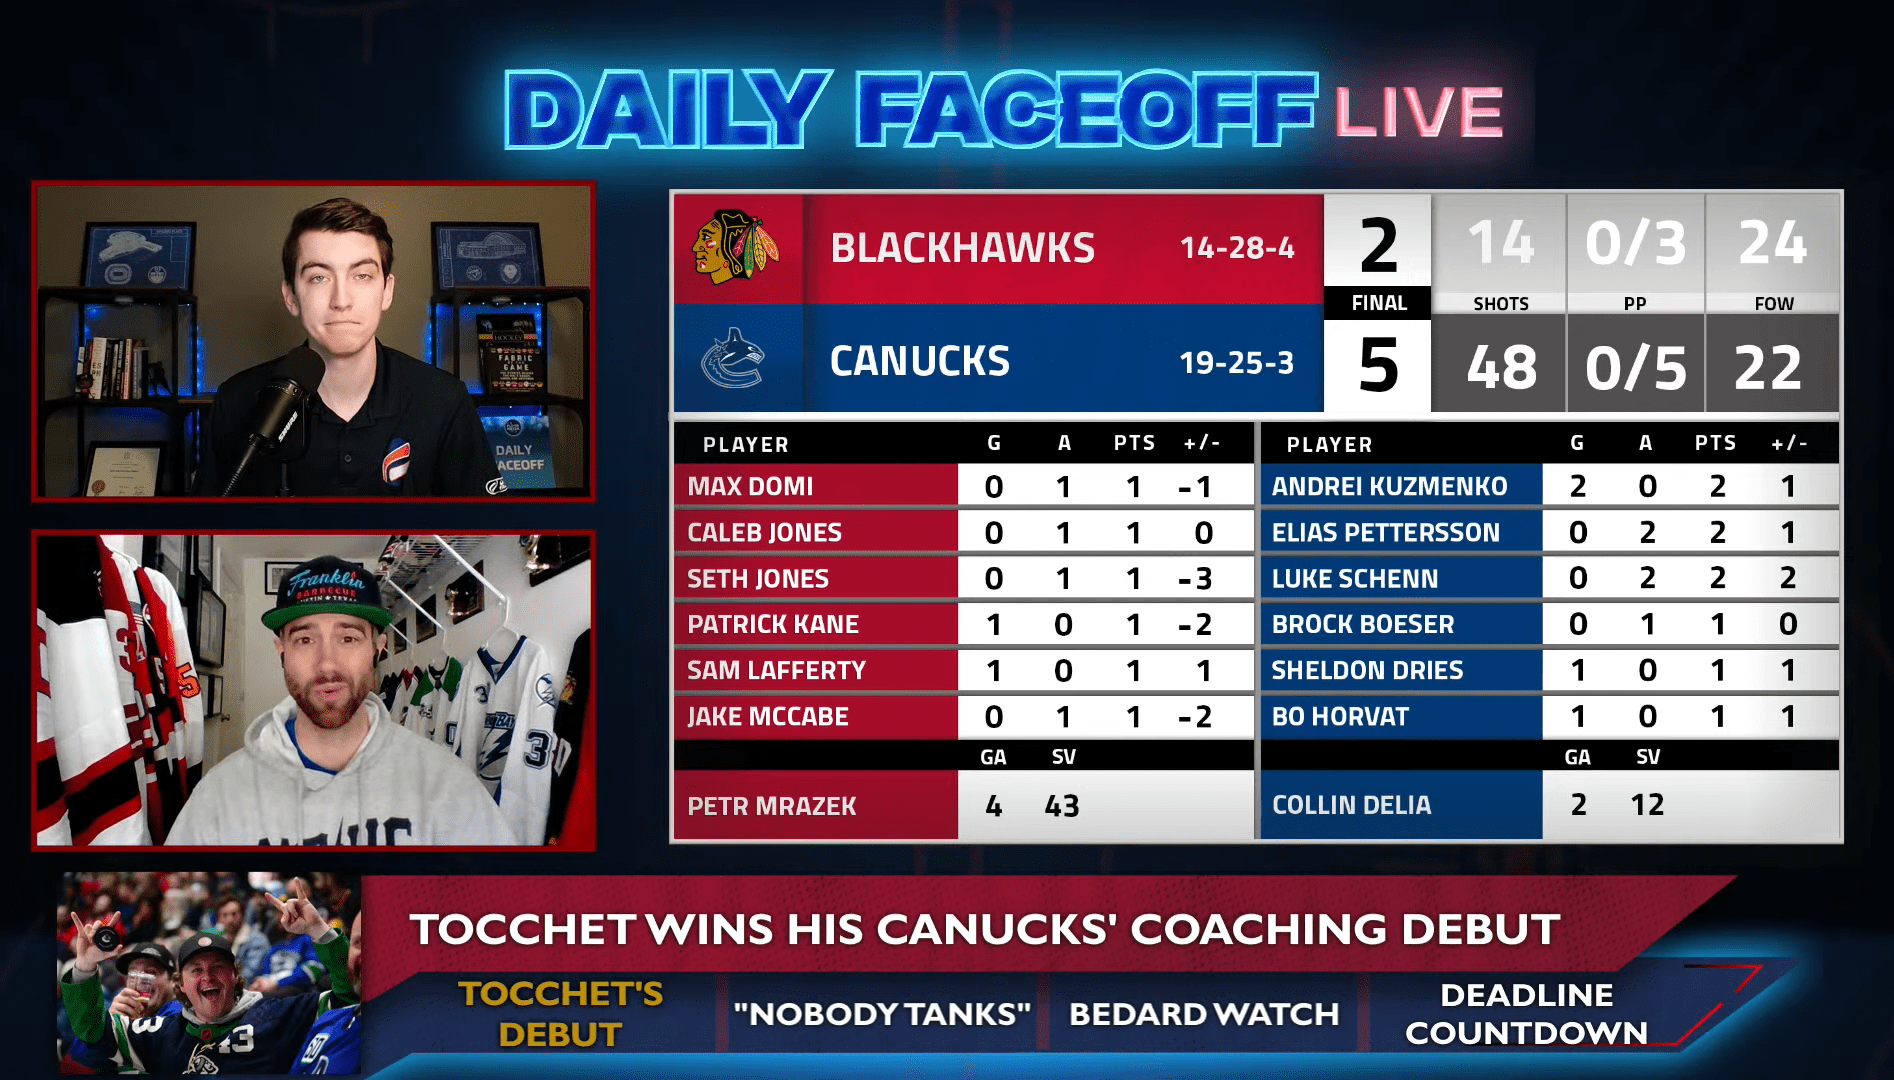 Daily Faceoff Live: The players showed up for Rick Tocchet’s coaching debut in Vancouver